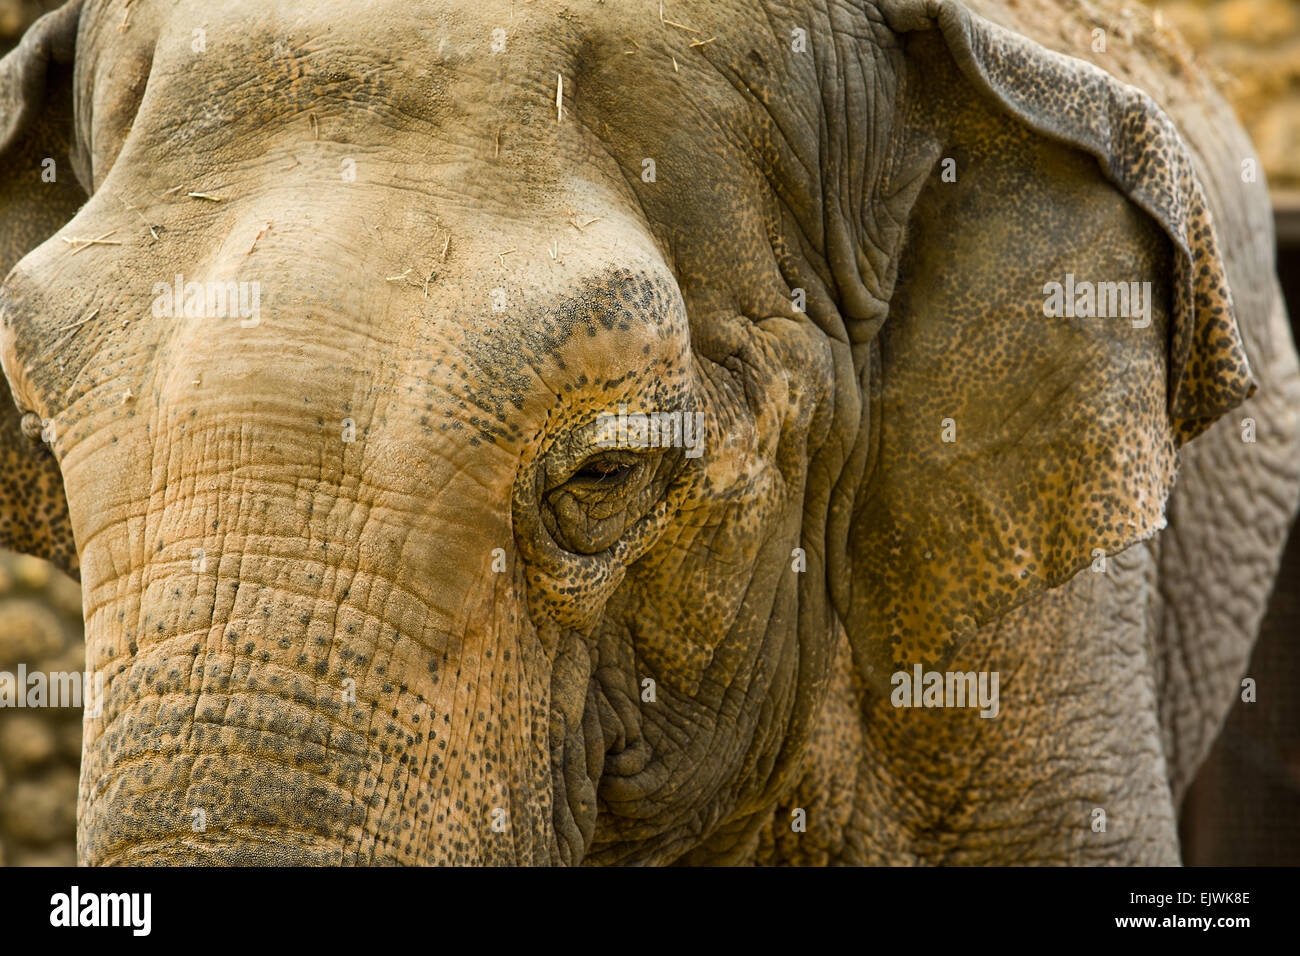 Close up view of an Asian elephant, Elephas maximus Stock Photo